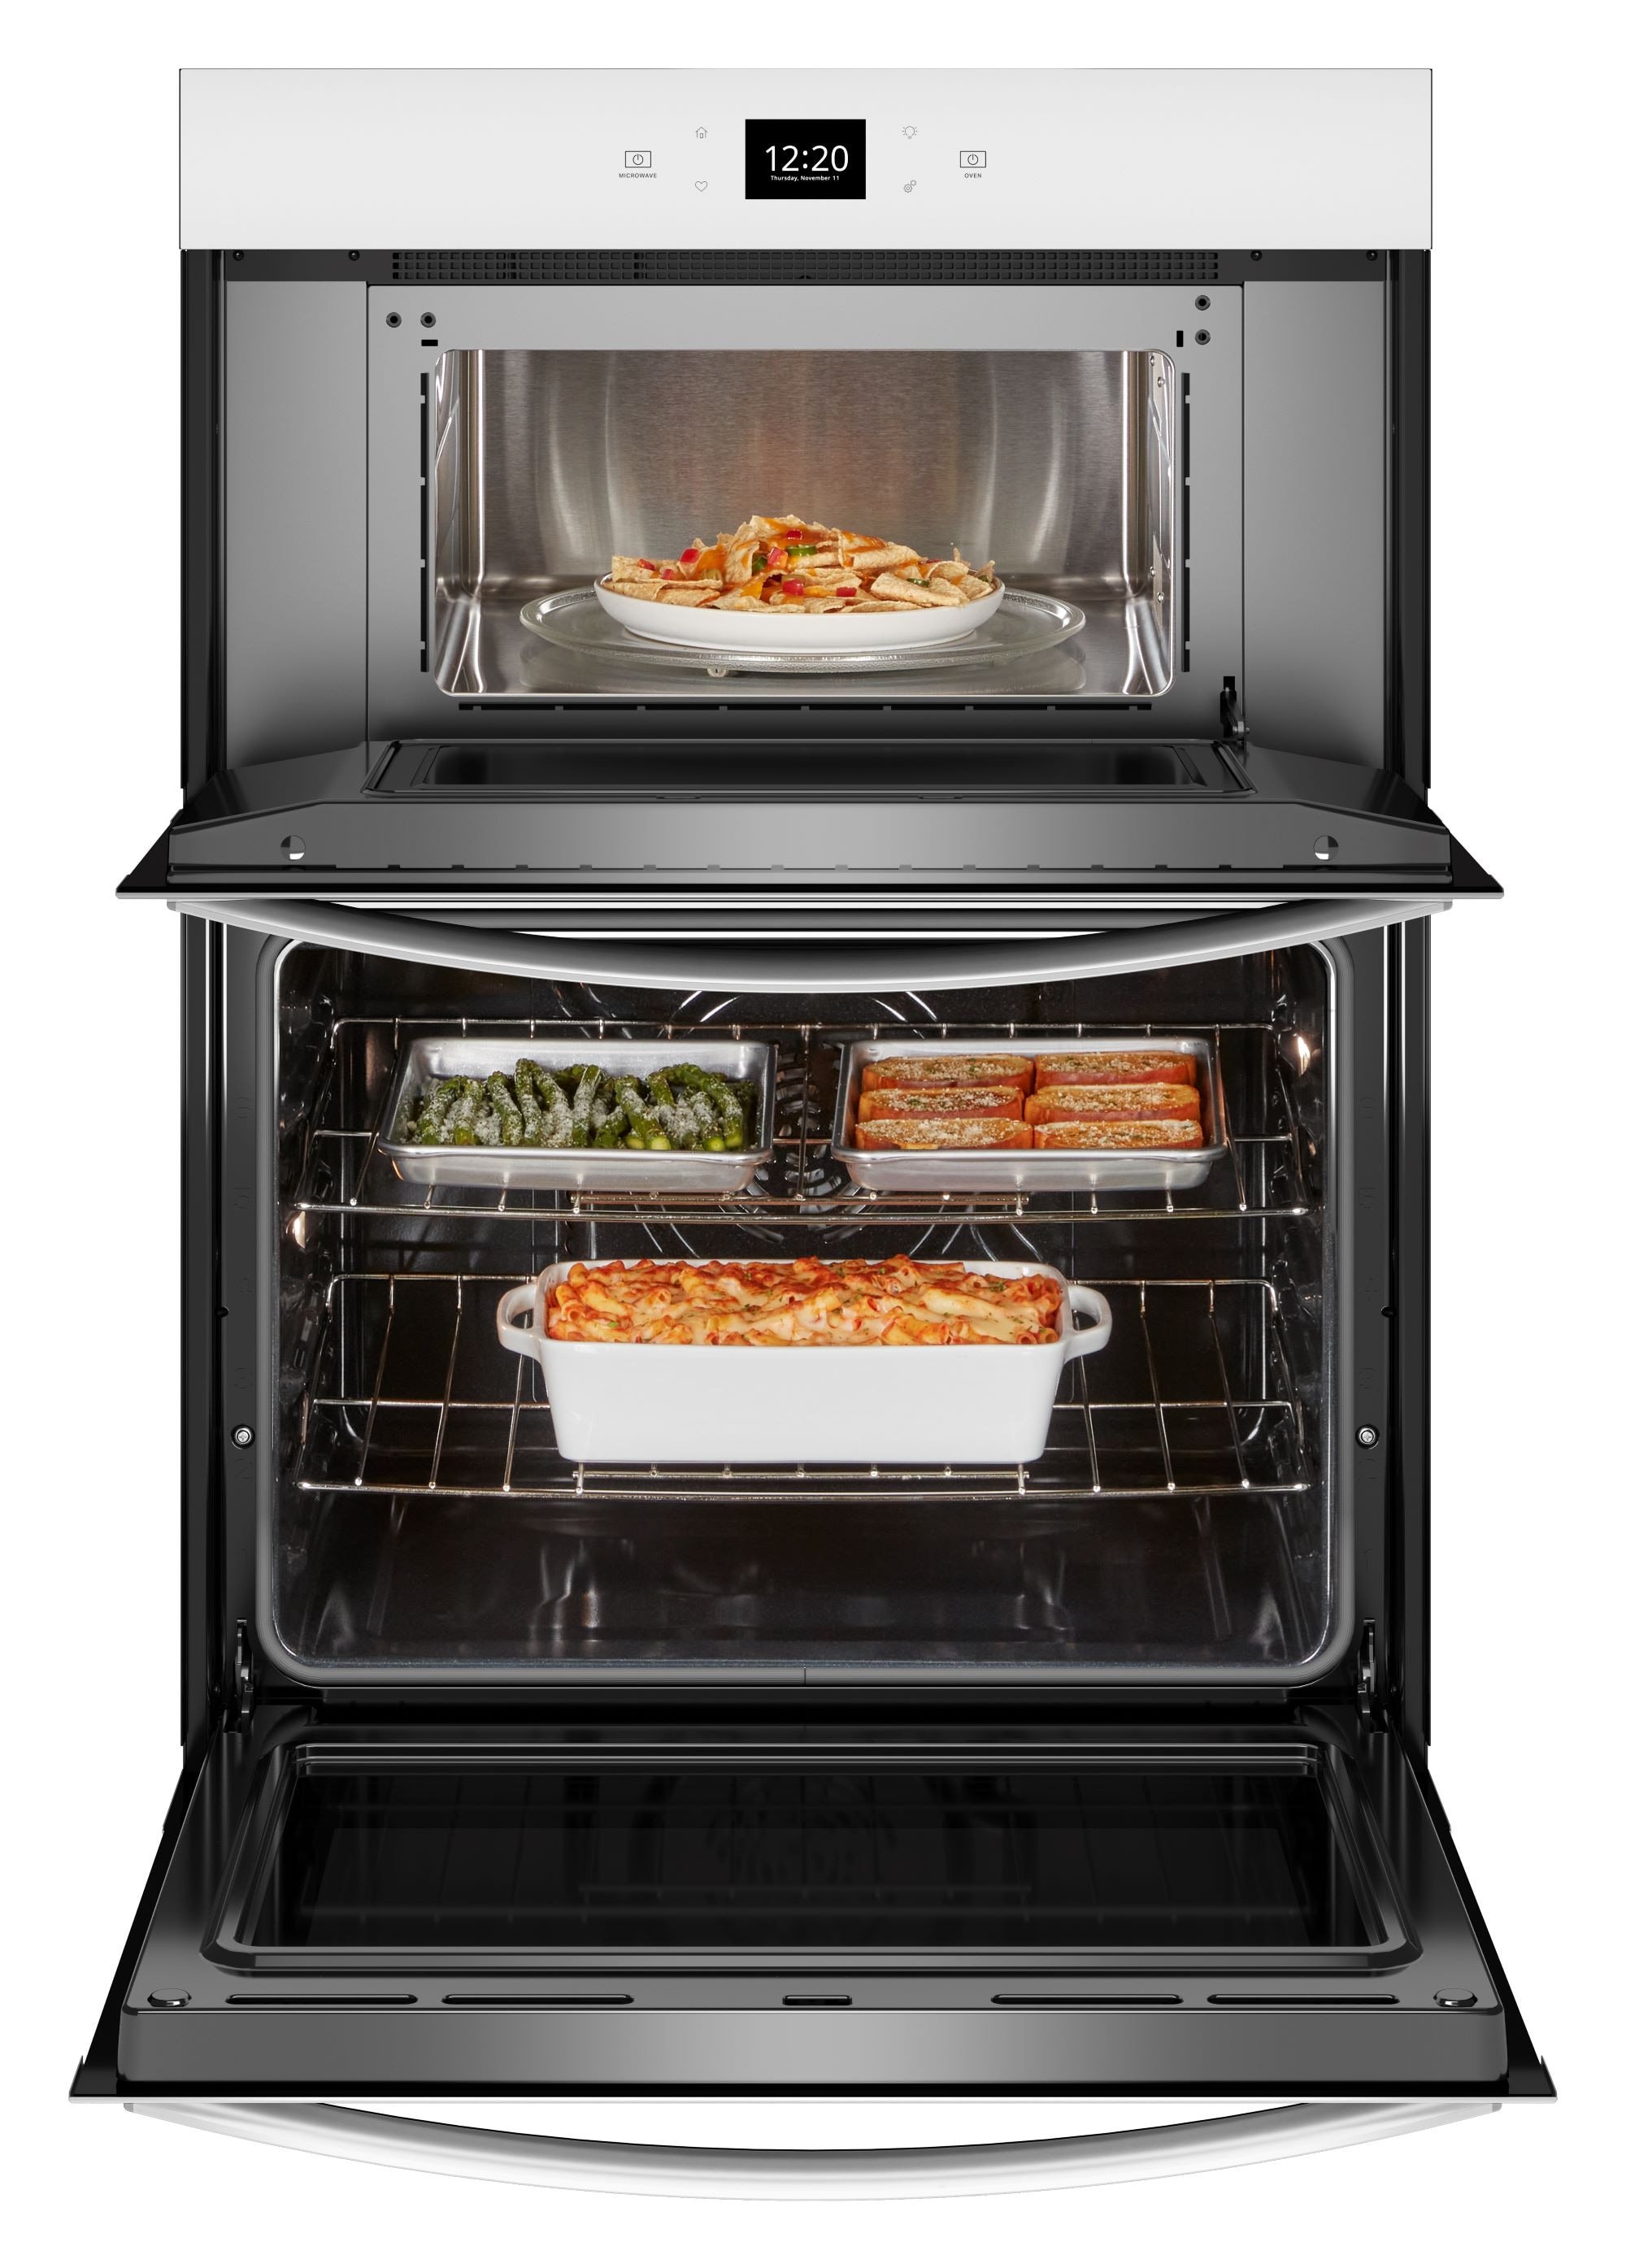 Buy Whirlpool 5.0 Cu. Ft. Wall Oven Microwave Combo with Air Fry